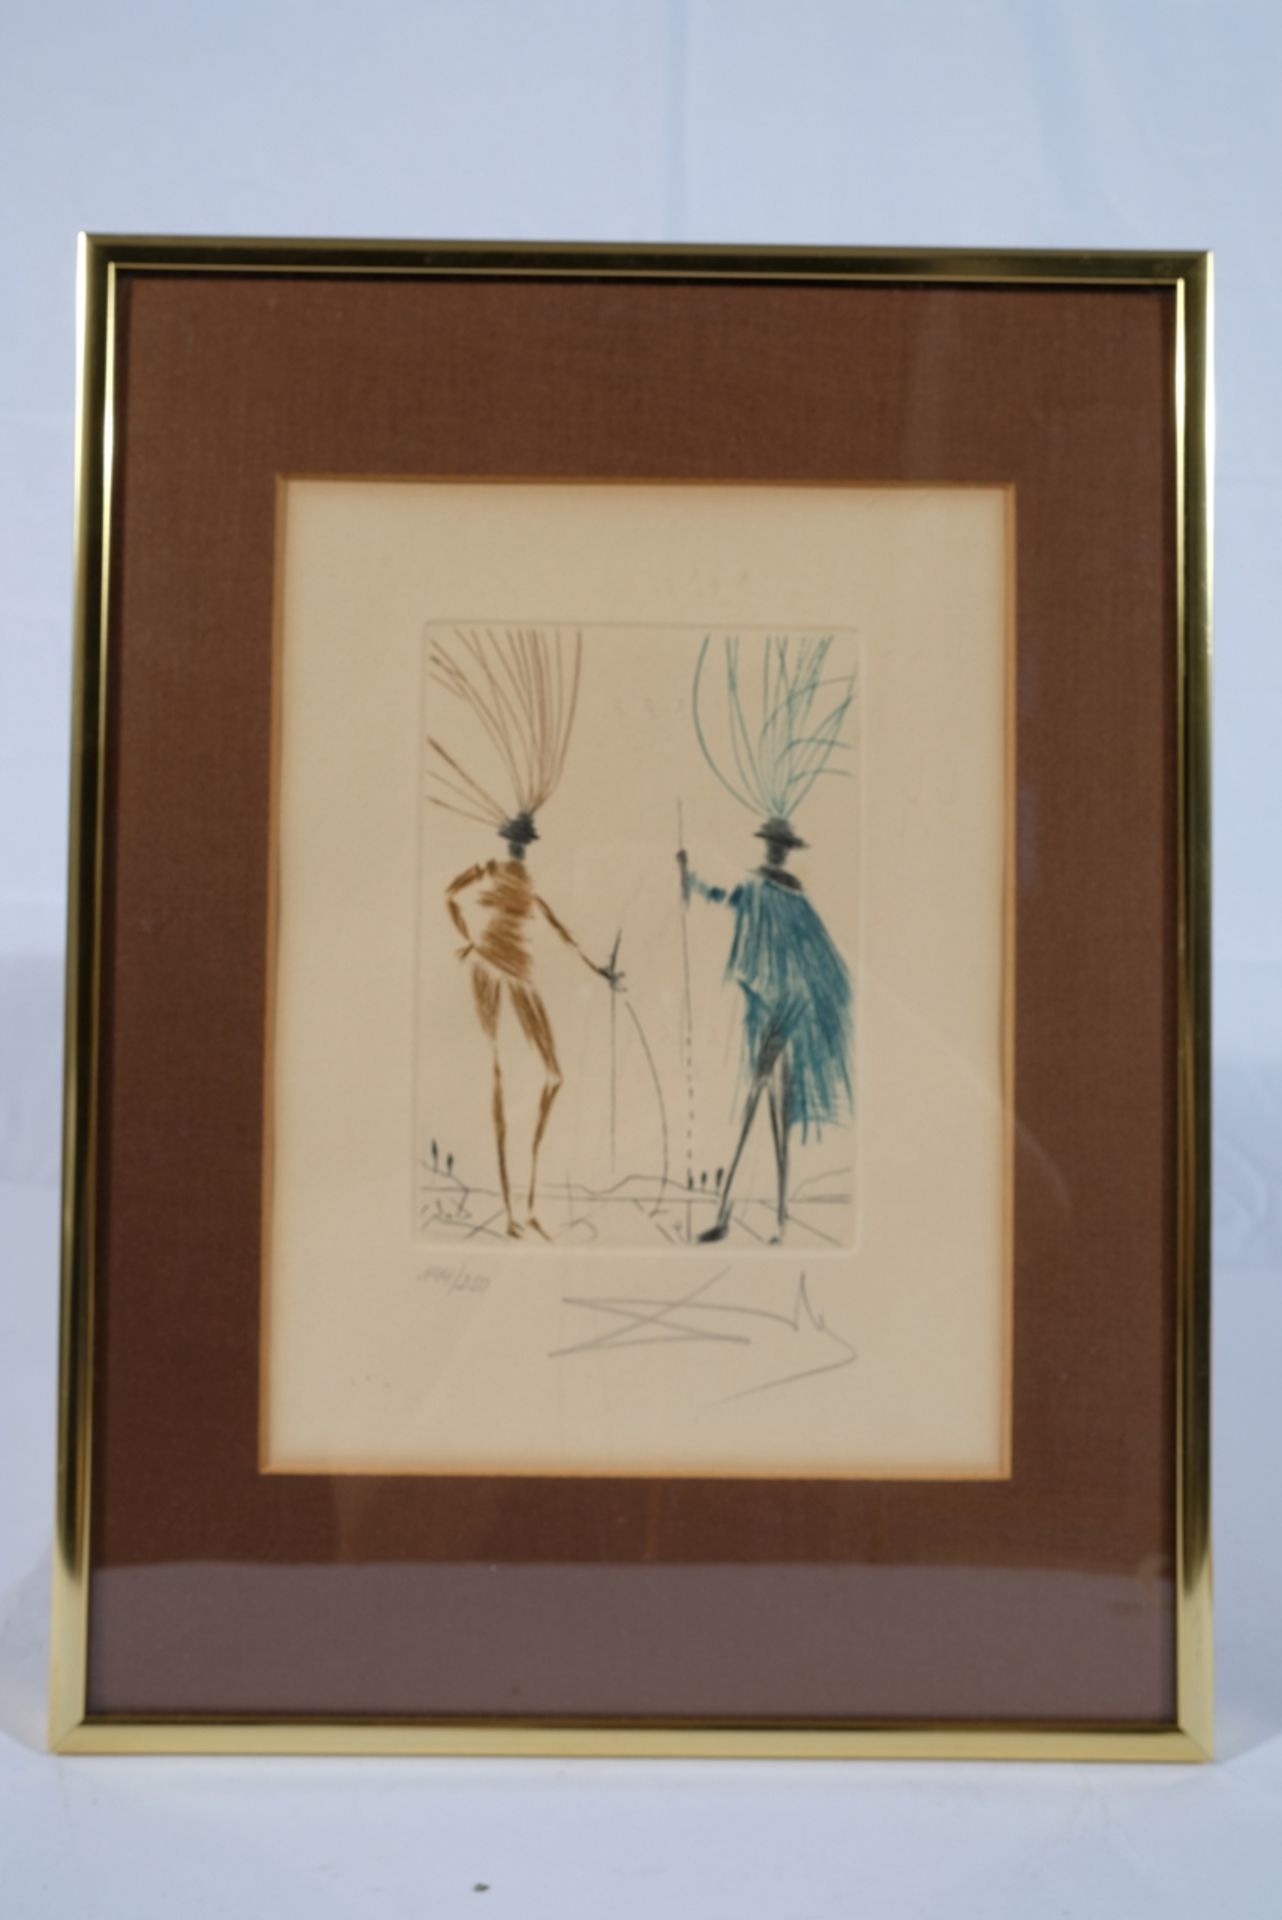 Dali, Salvador (1904-1989) "Walpurgisnacht 1968/69", colour etching on paper.  - Image 2 of 3